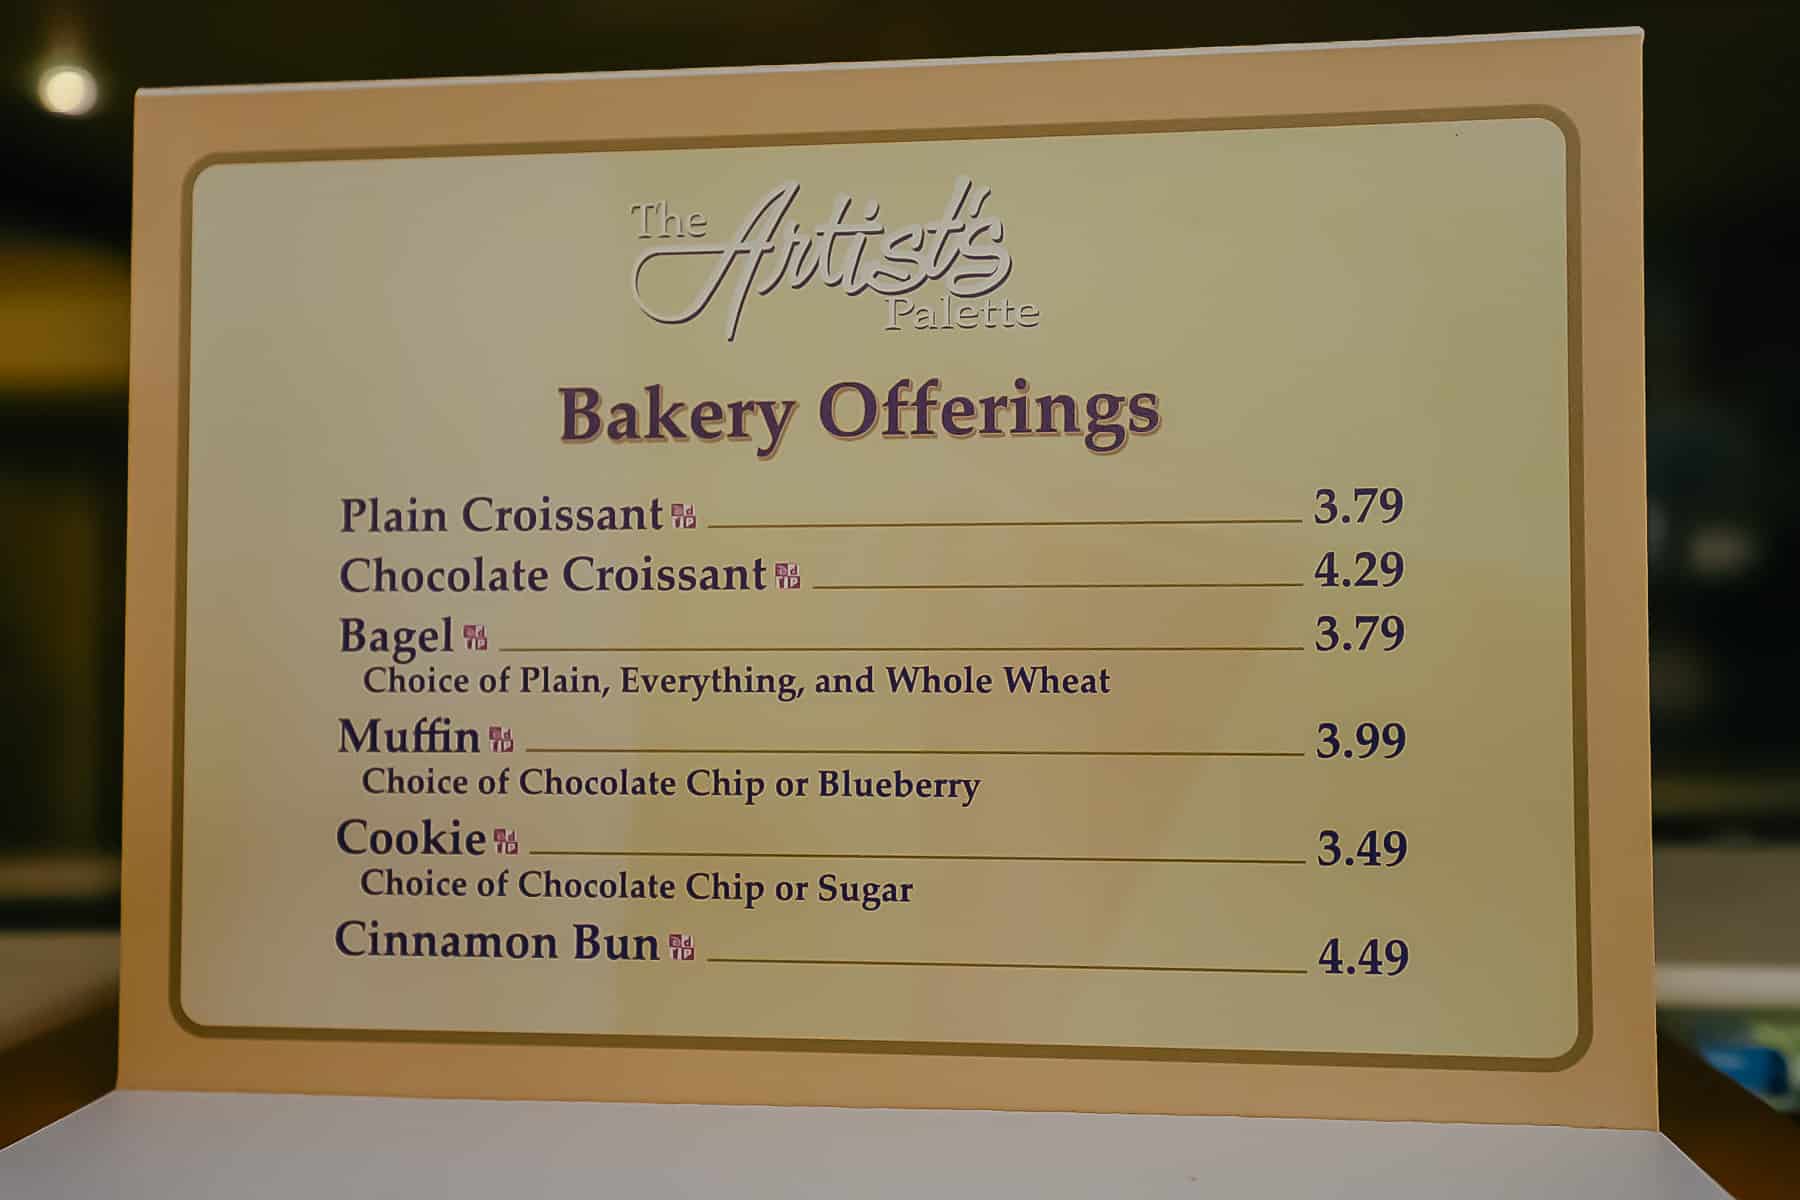 Menu that lists prices of bakery offerings at The Artist's Palette. 